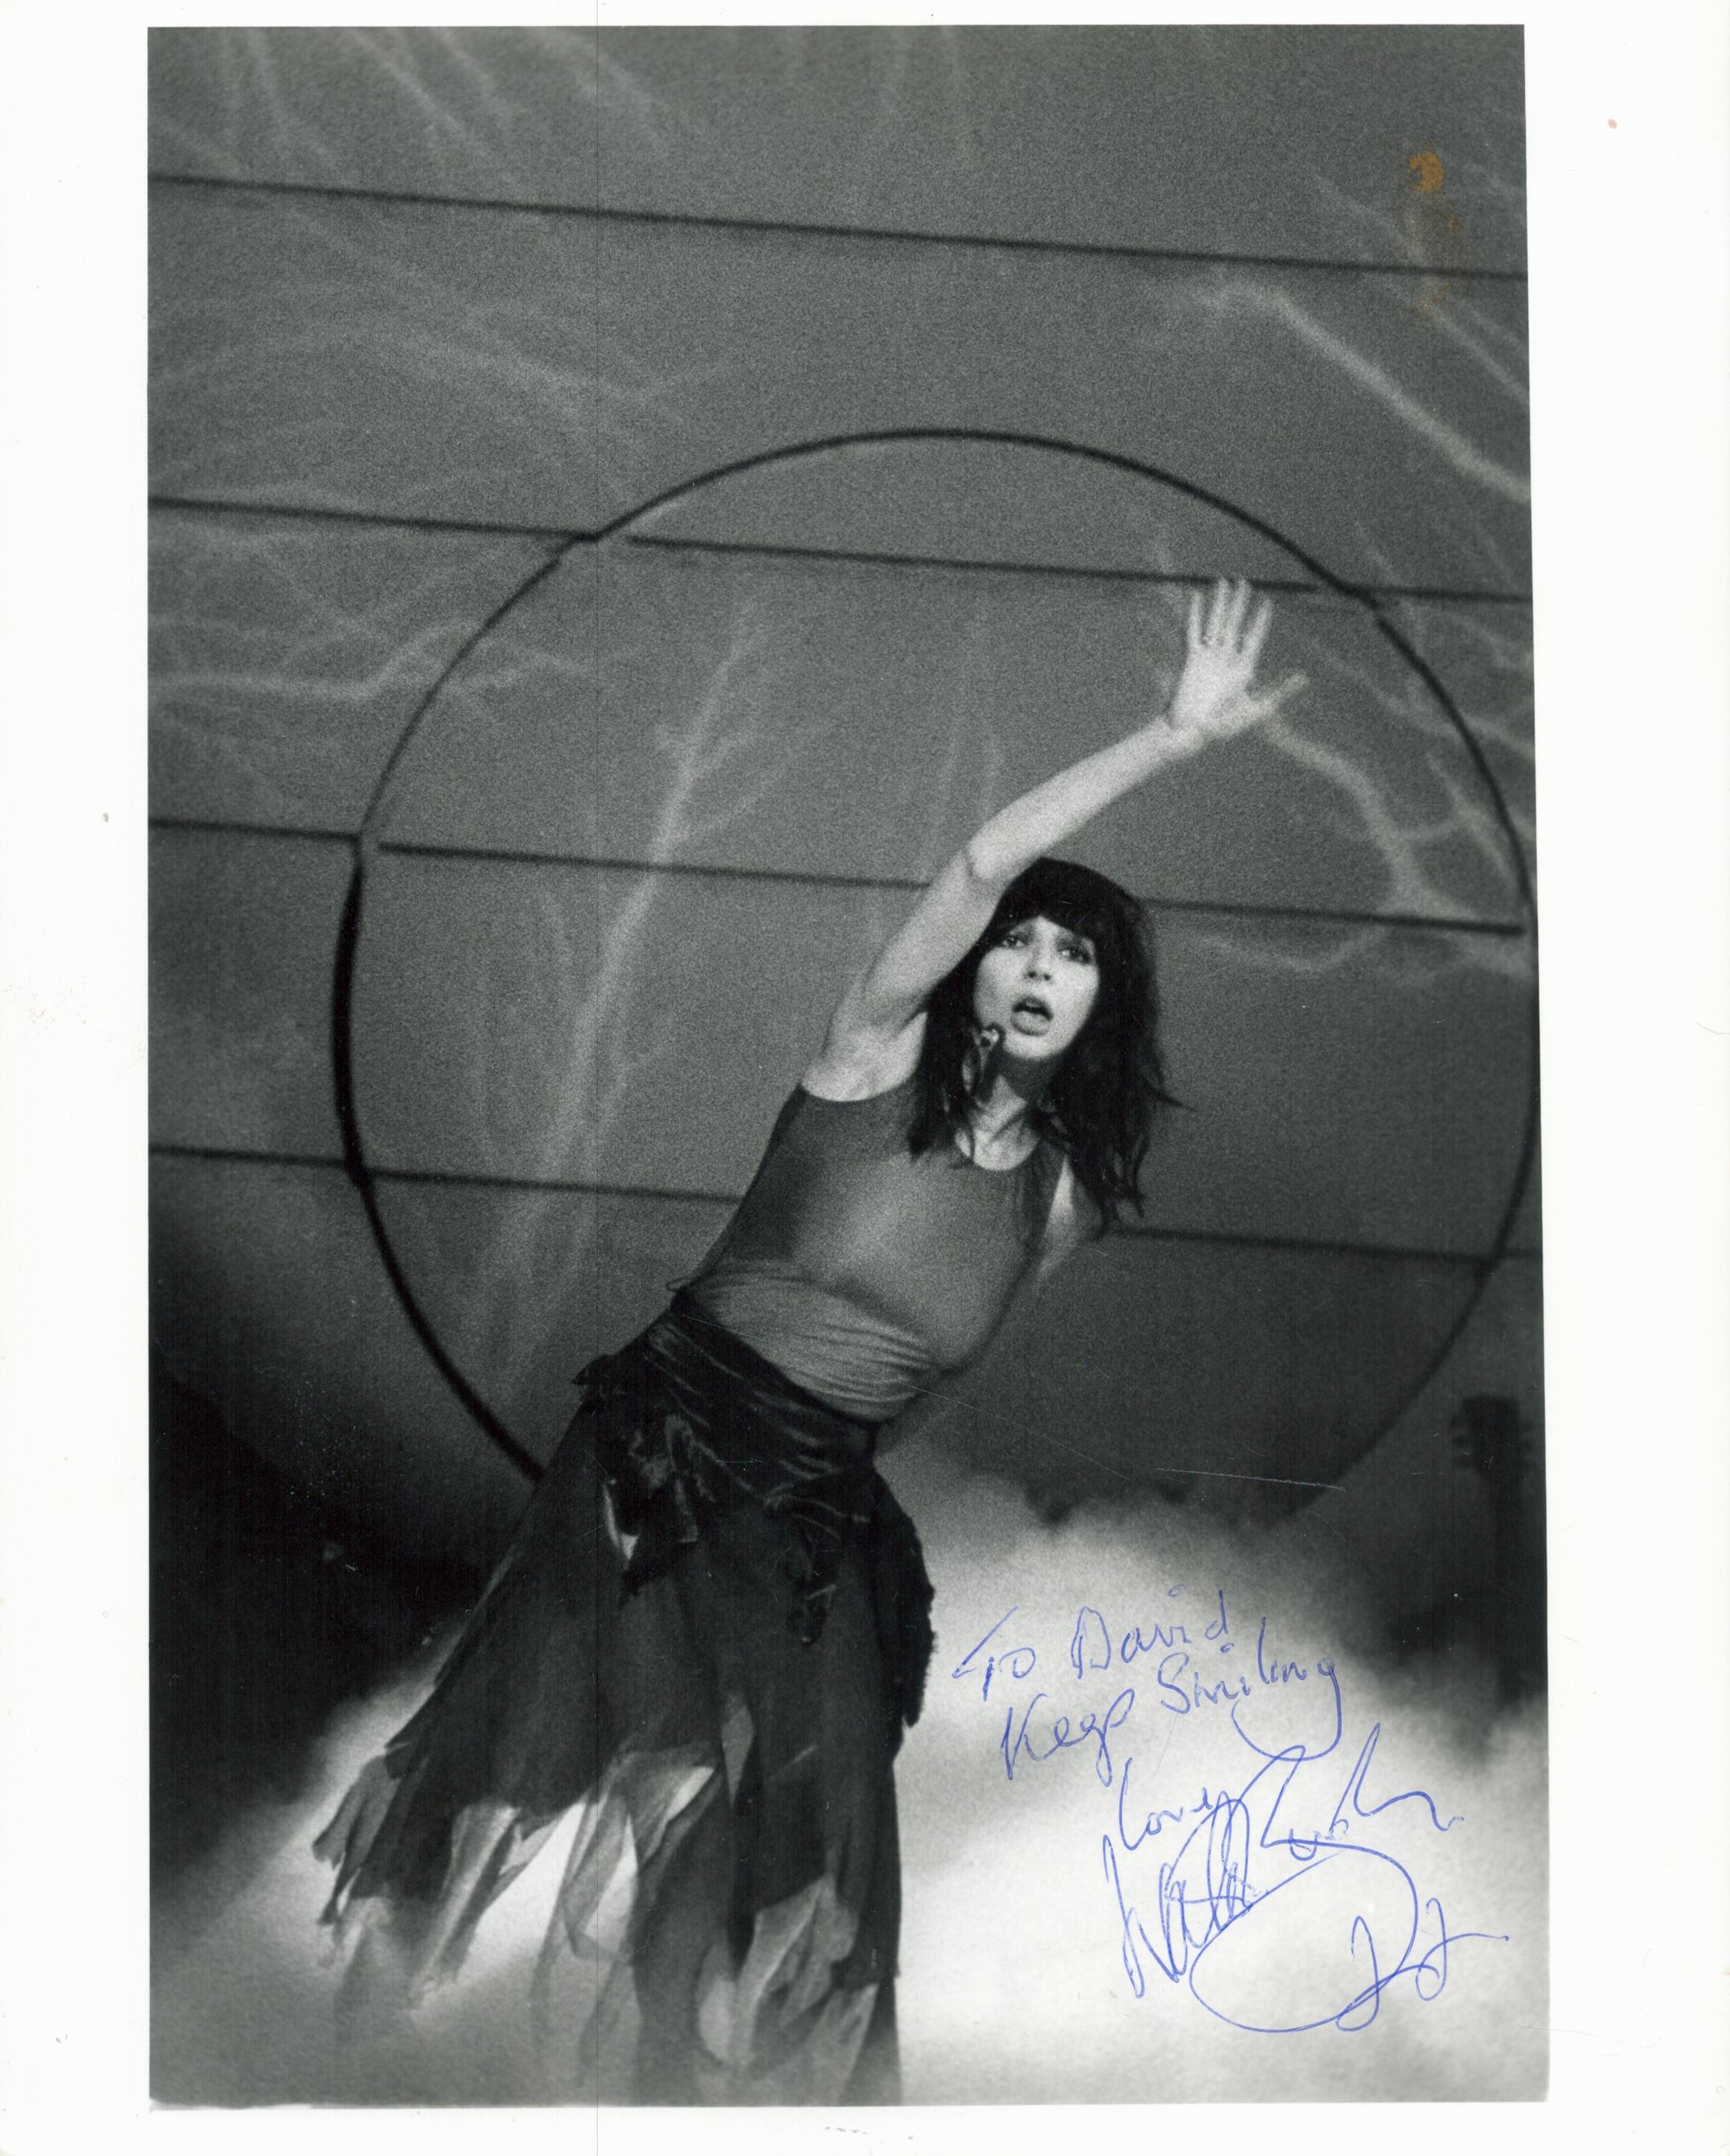 Singer, Kate Bush signed 10x8 inch black and white photograph signed in blue pen, dedicated and